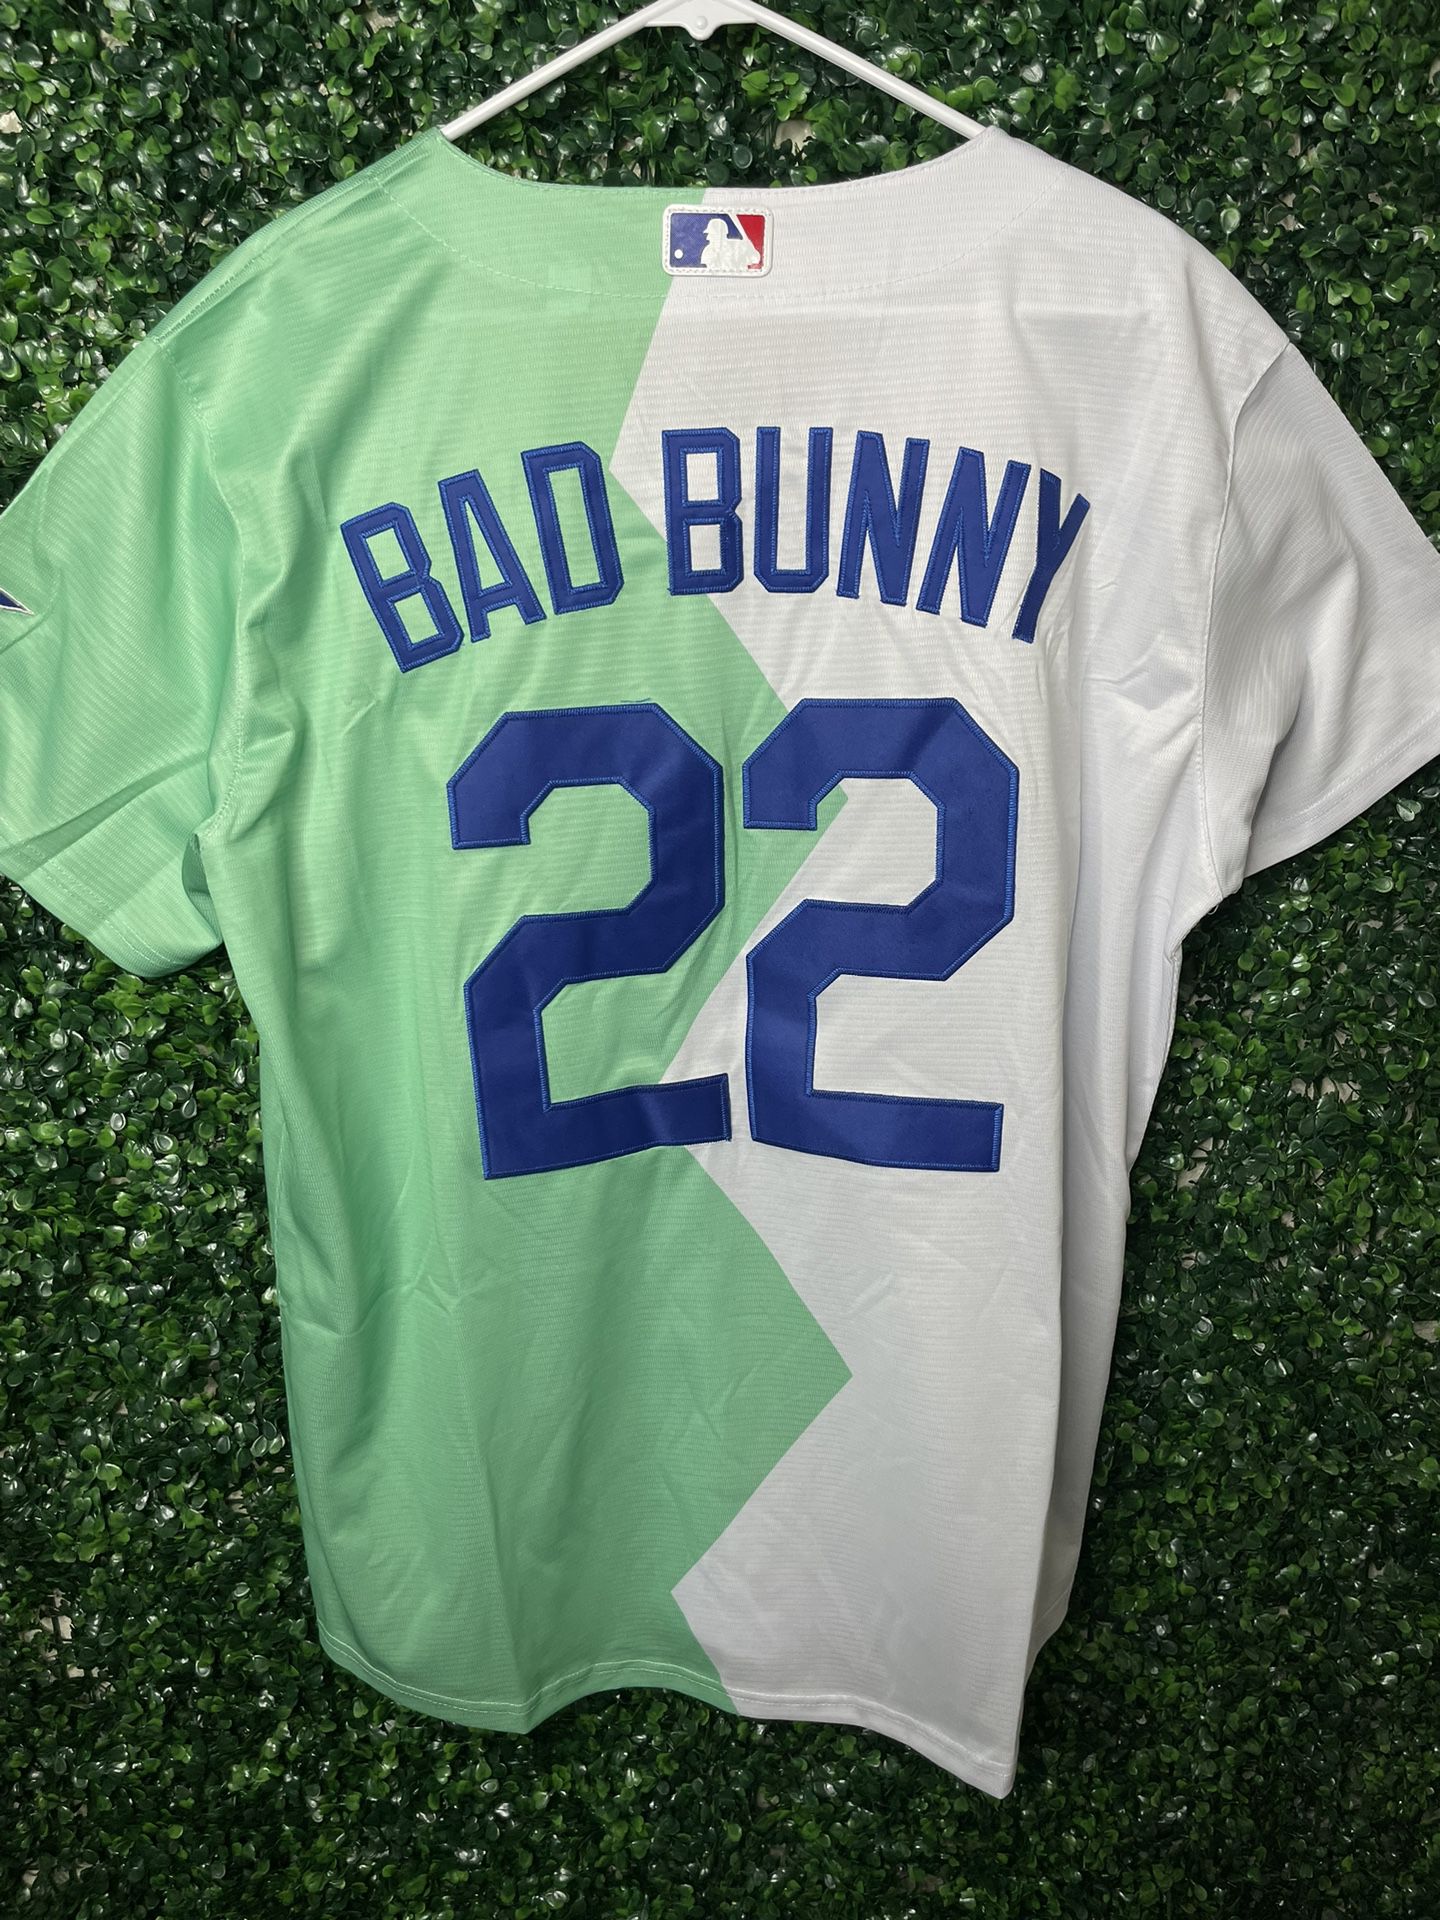 Bad Bunny Dodgers Jersey 2XL for Sale in Long Beach, CA - OfferUp